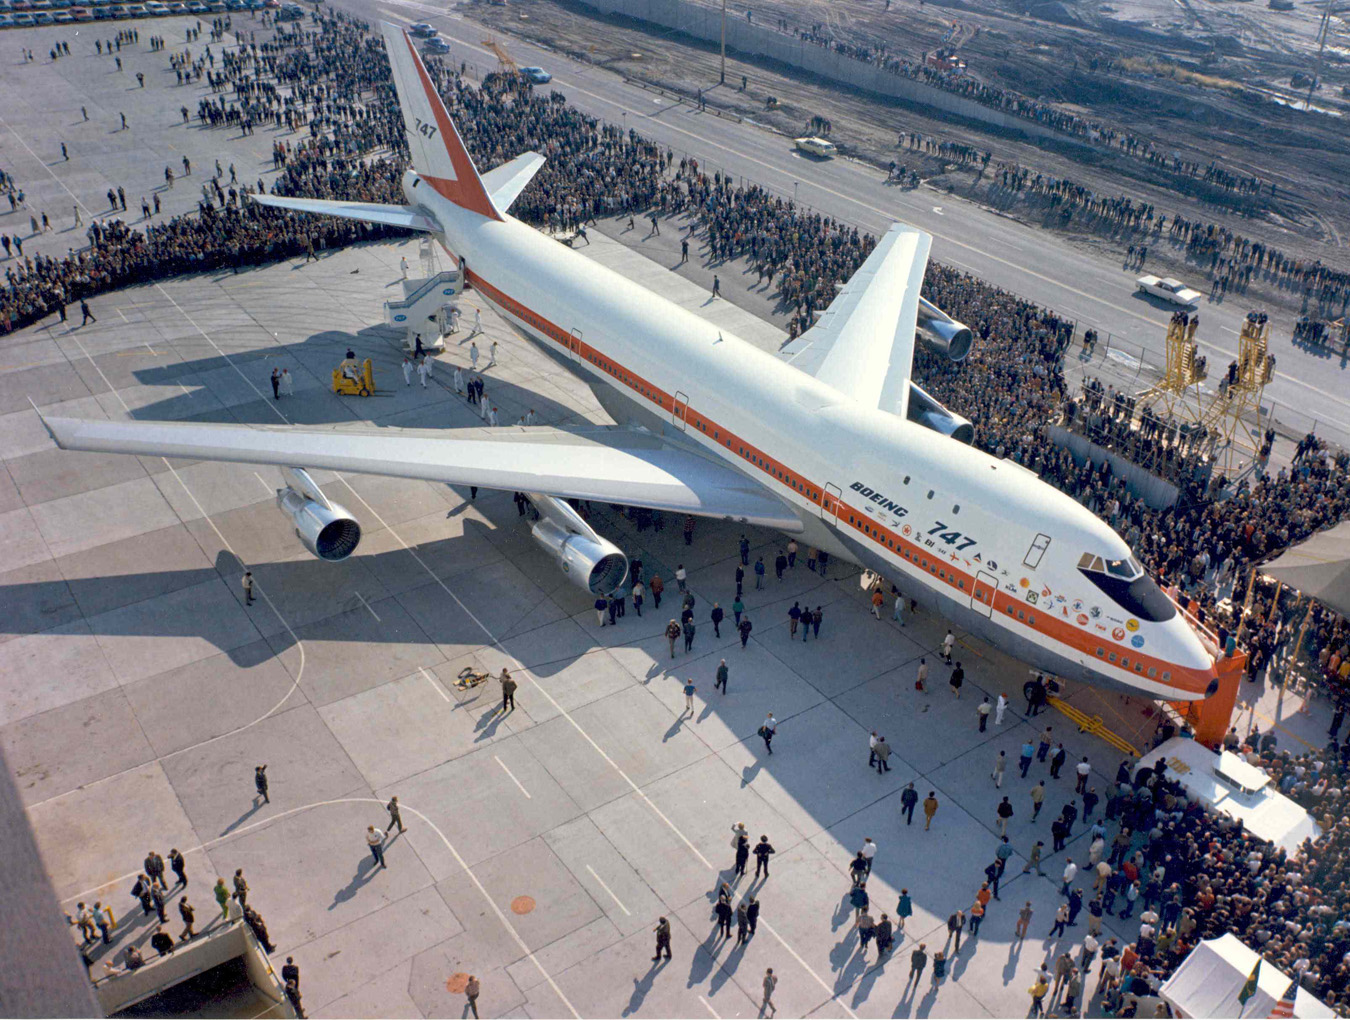  The rollout of the prototype 747 in 1969.  (Boeing Archives)  